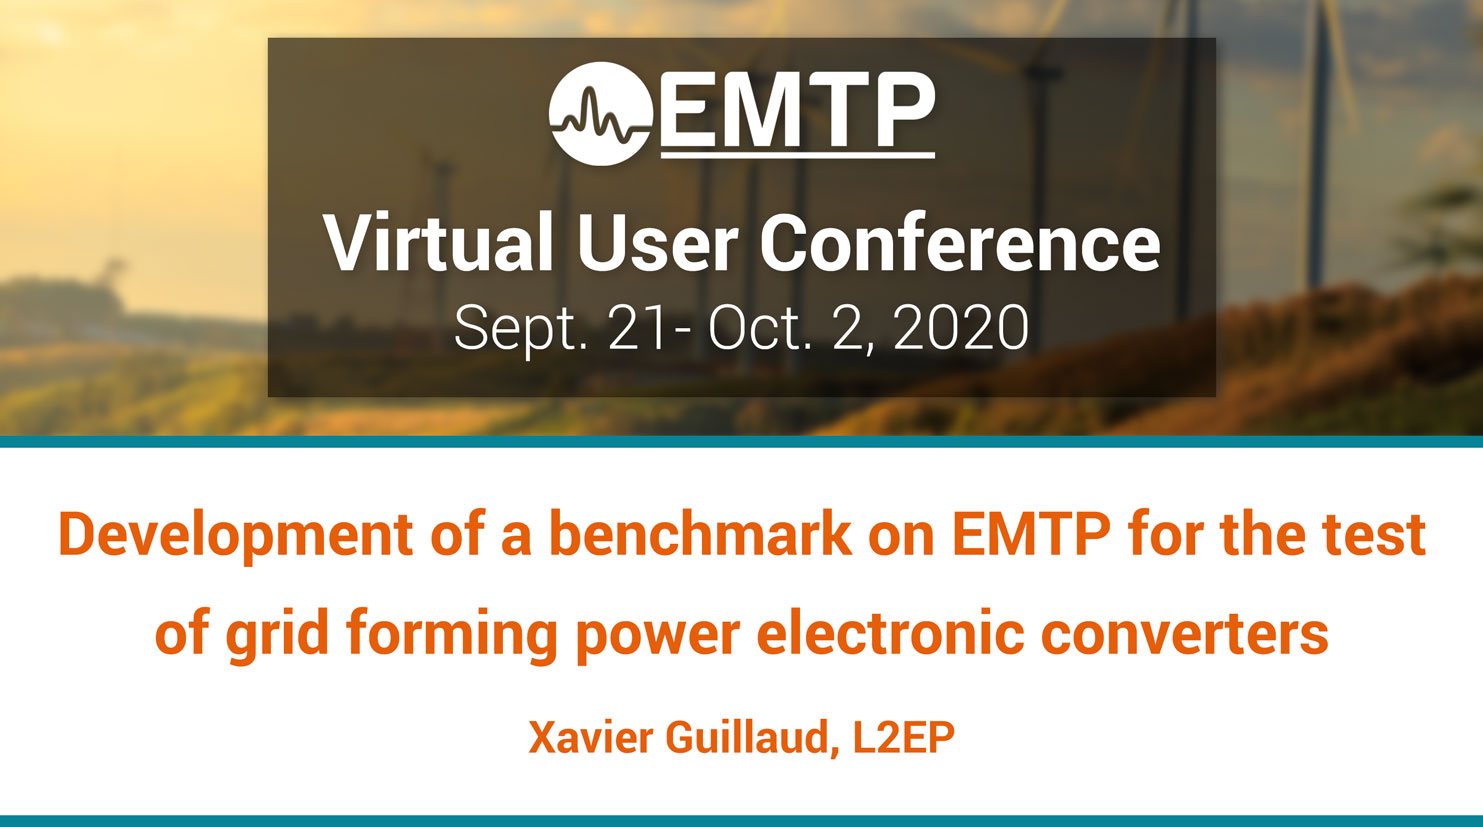 Development of a benchmark on EMTP for the test of grid forming power electronic converters